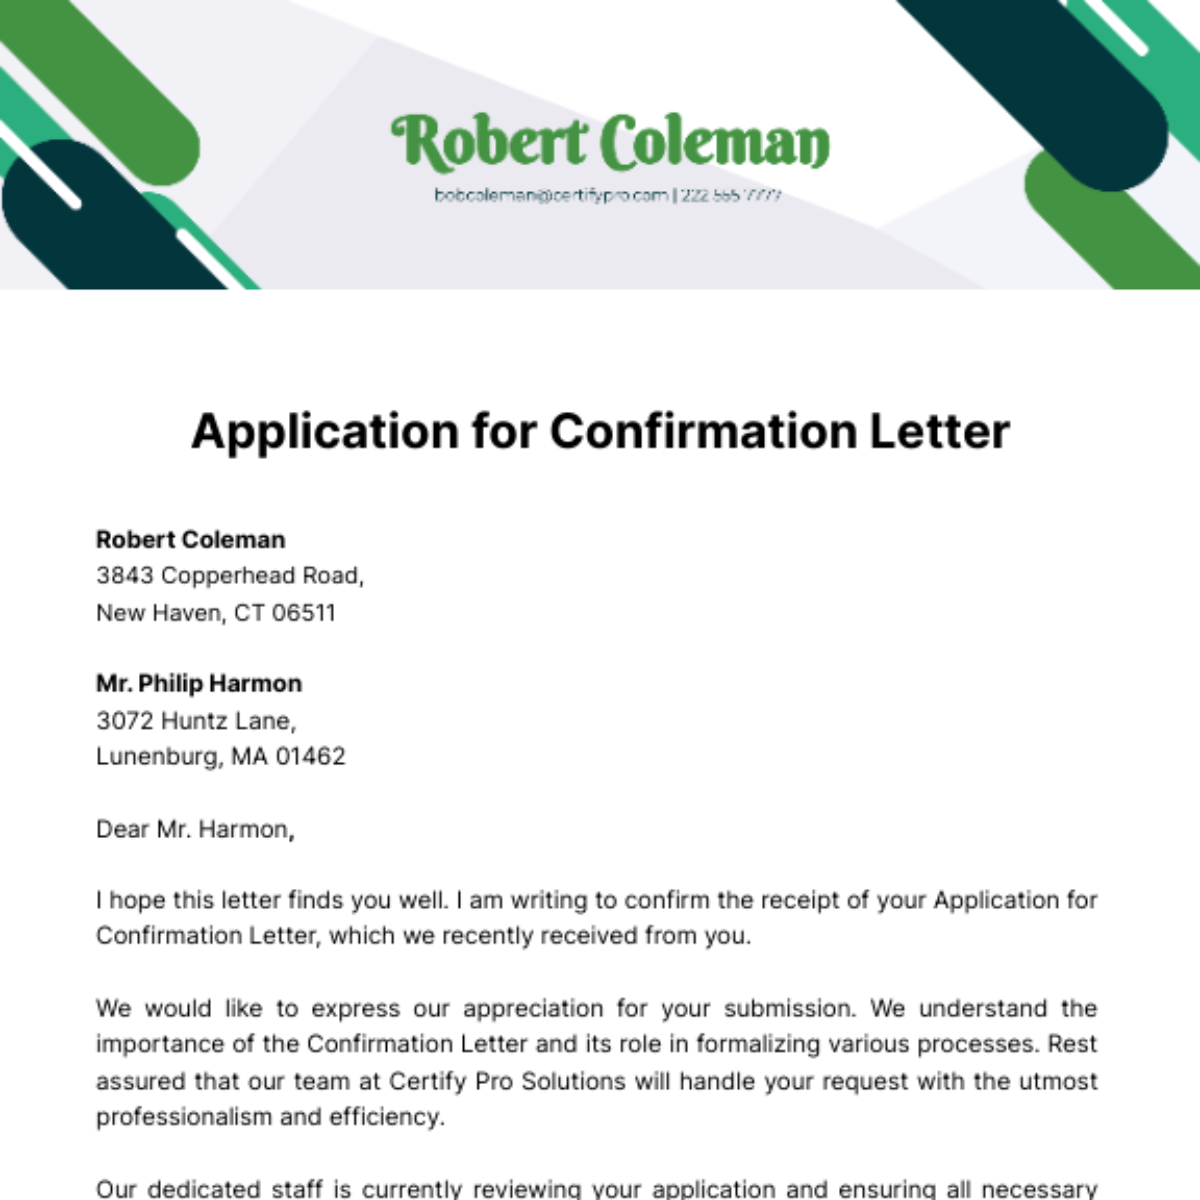 Free Application for Confirmation Letter Template